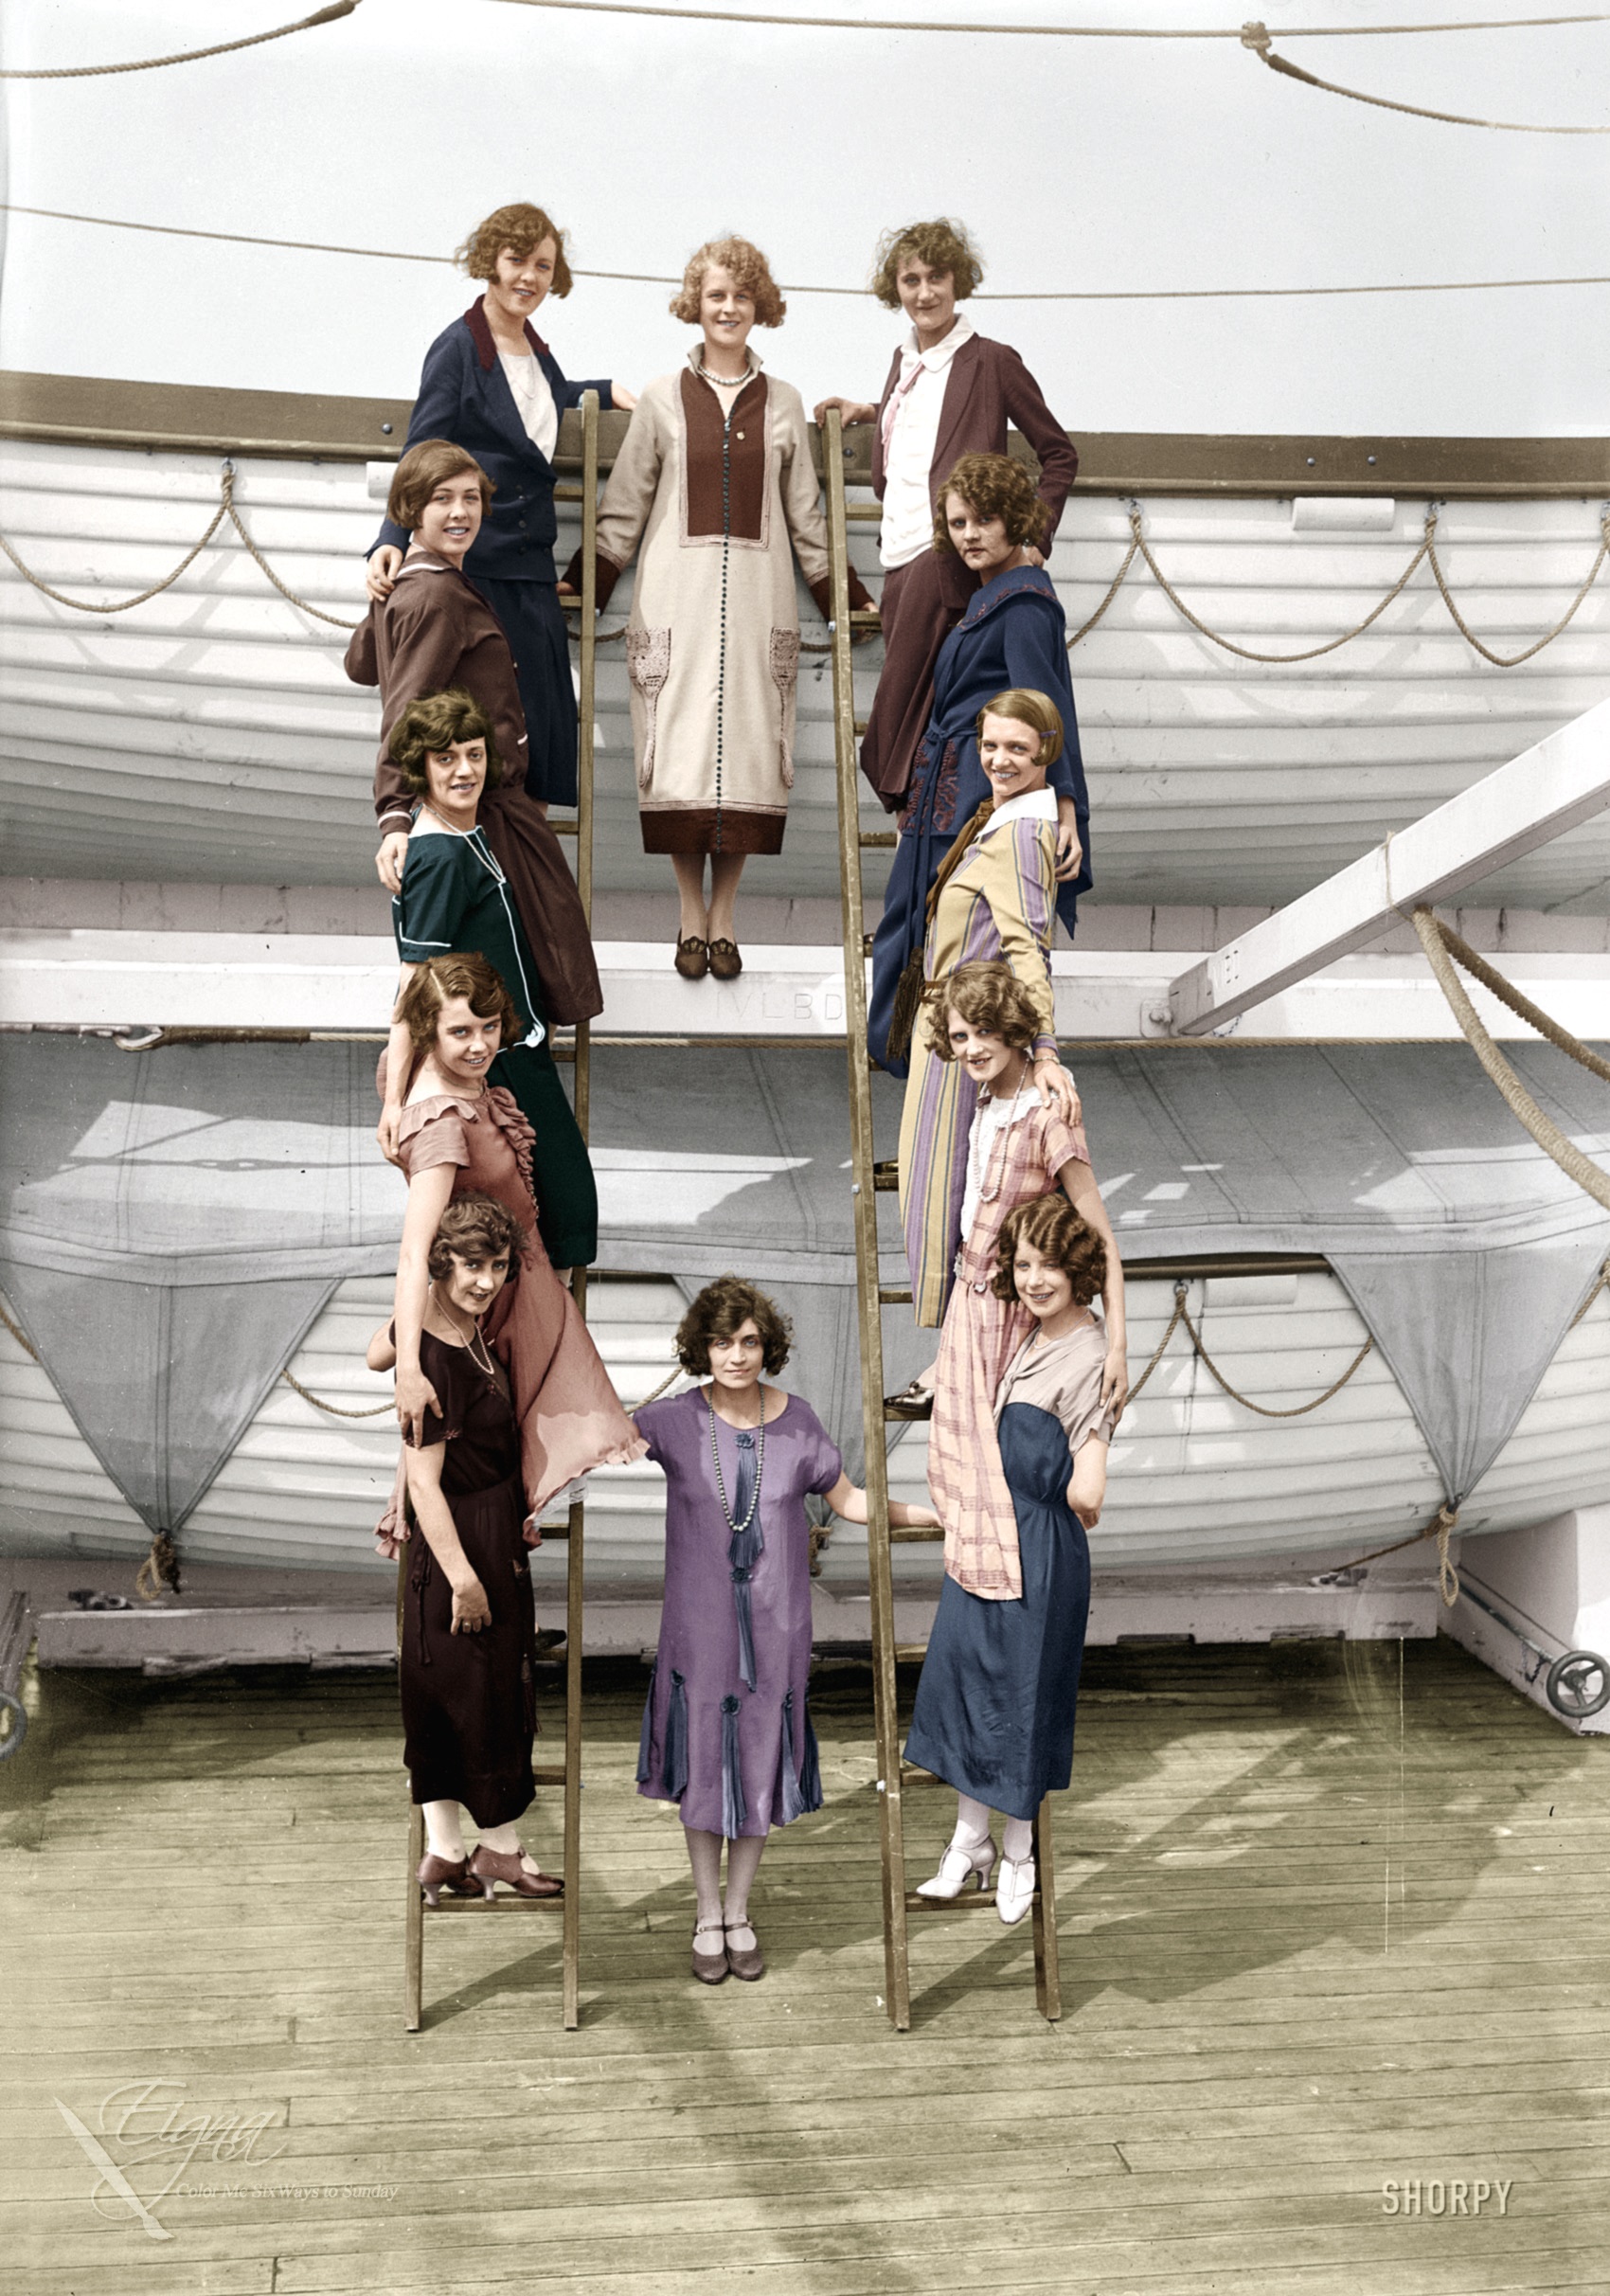 Colorized version of the Shorpy image of the "Tiller girls," circa 1925.